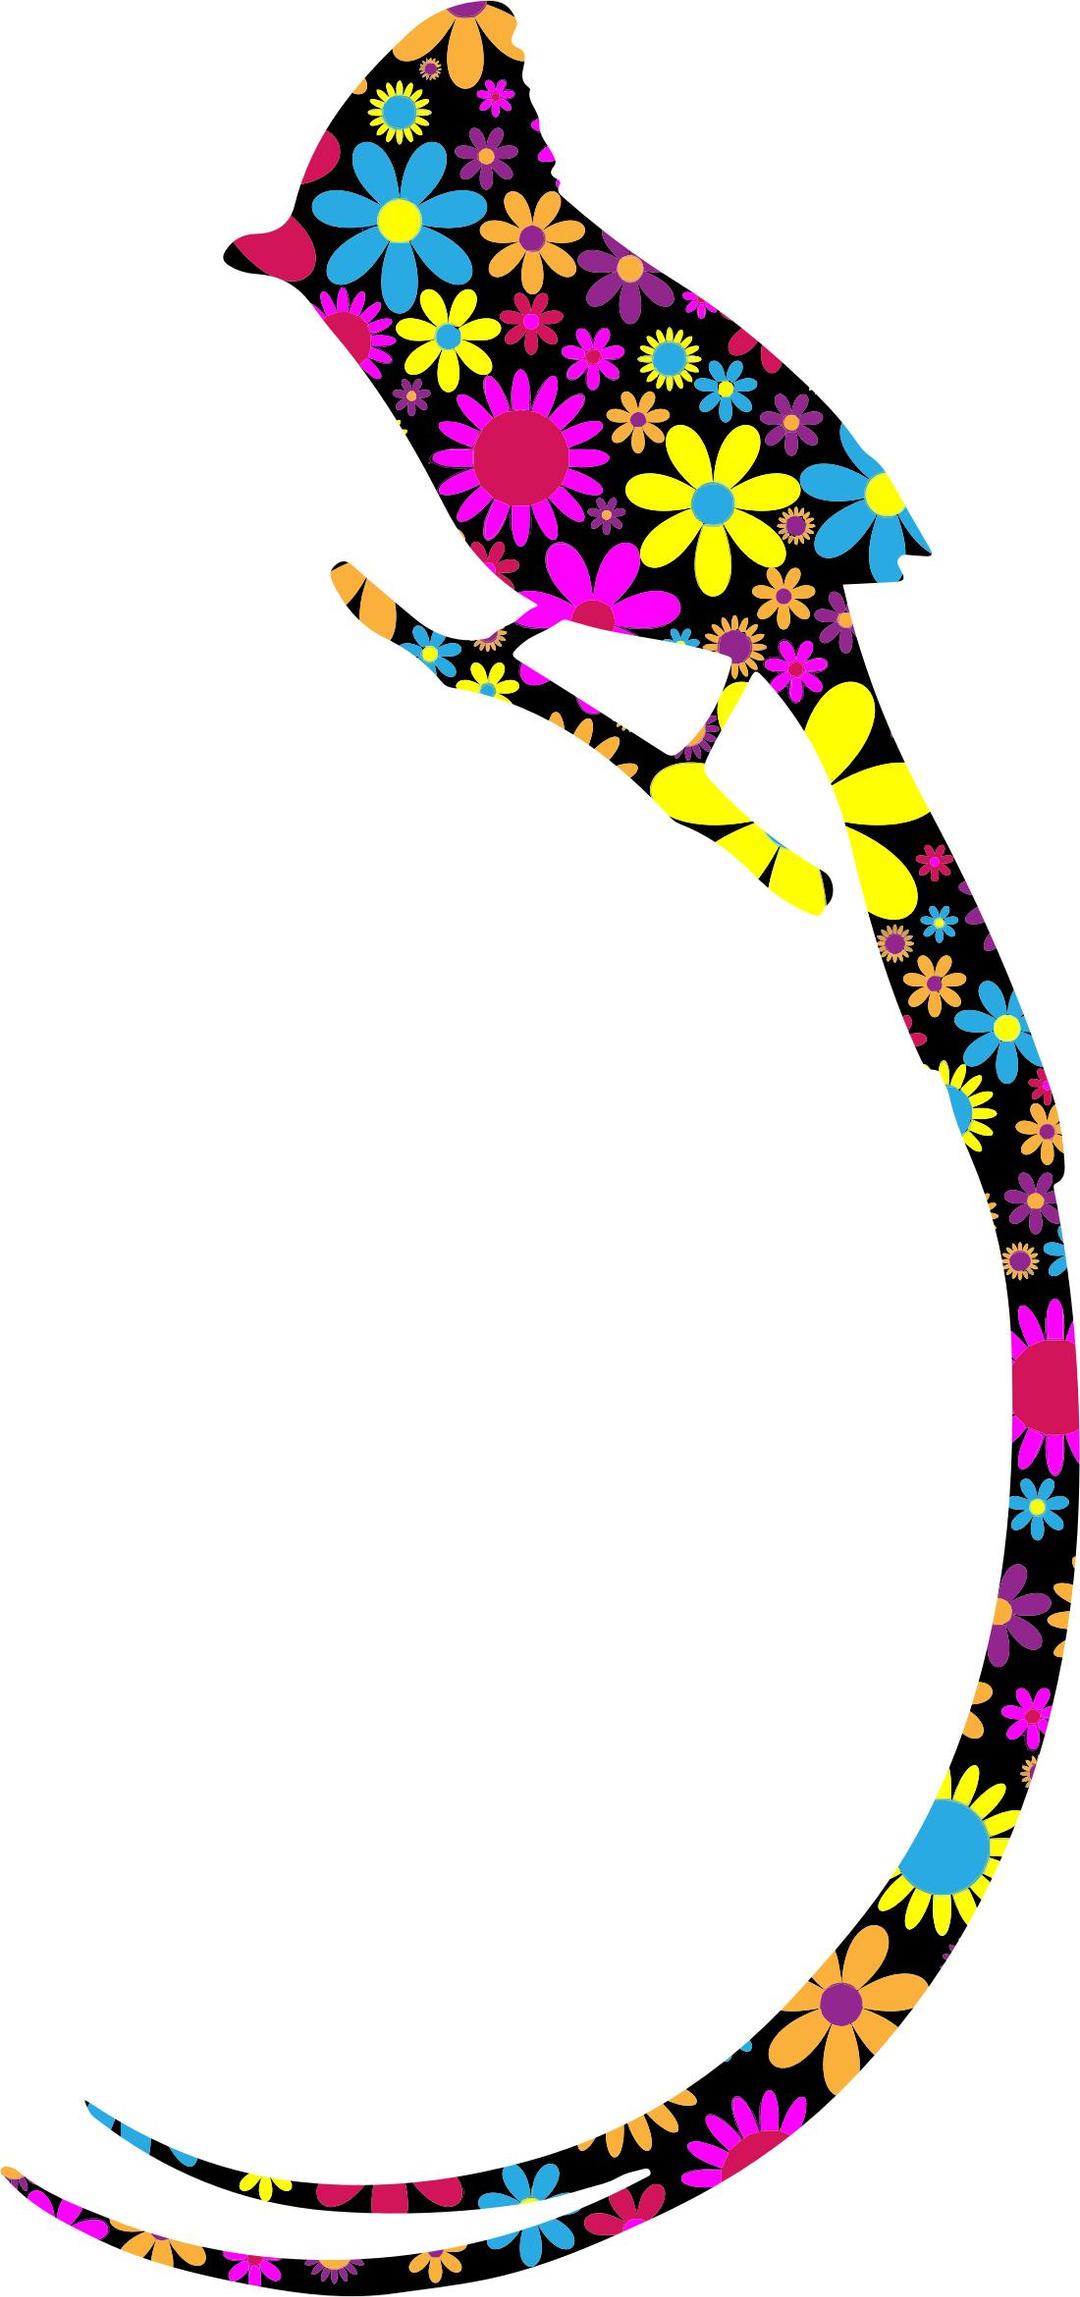 Floral Long Tailed Bird Silhouette png transparent